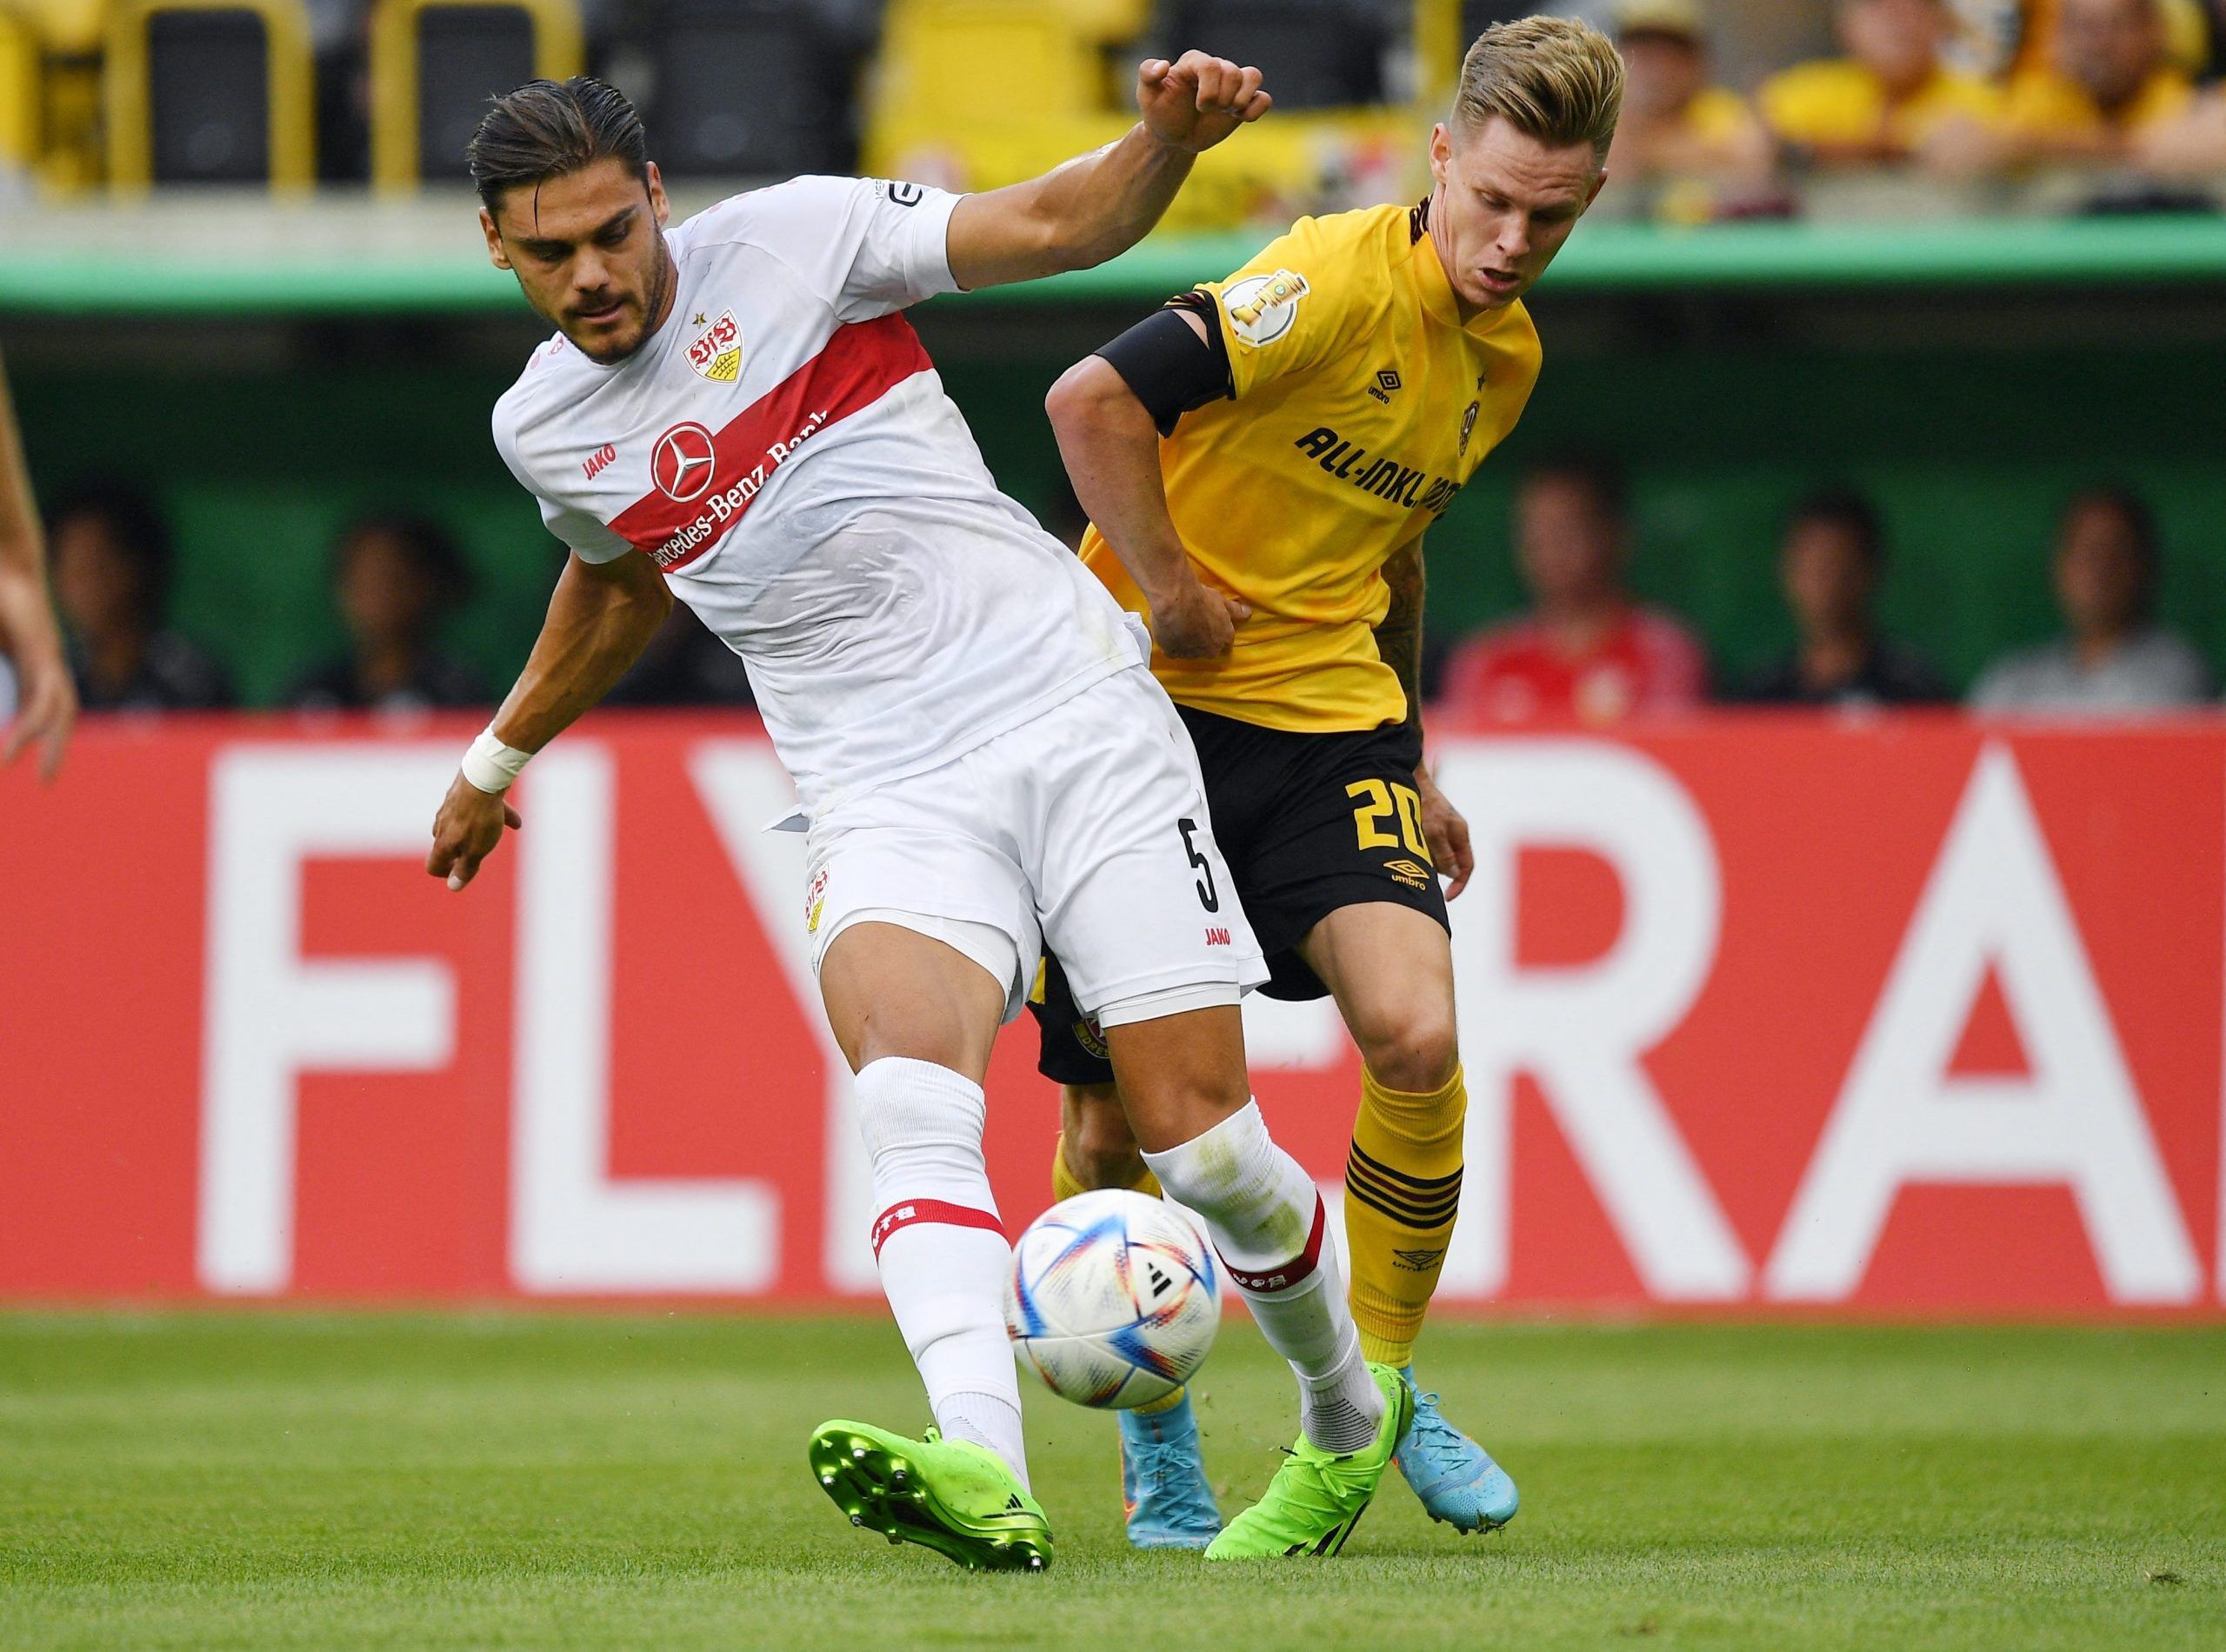 Soccer Football - DFB Cup - First Round - Dynamo Dresden v VfB Stuttgart - Rudolf Harbig Stadion, Dresden, Germany - July 29, 2022 VfB Stuttgart's Konstantinos Mavropanos in action with Dynamo Dresden's Julius Kade REUTERS/Matthias Rietschel DFB REGULATIONS PROHIBIT ANY USE OF PHOTOGRAPHS AS IMAGE SEQUENCES AND/OR QUASI-VIDEO.